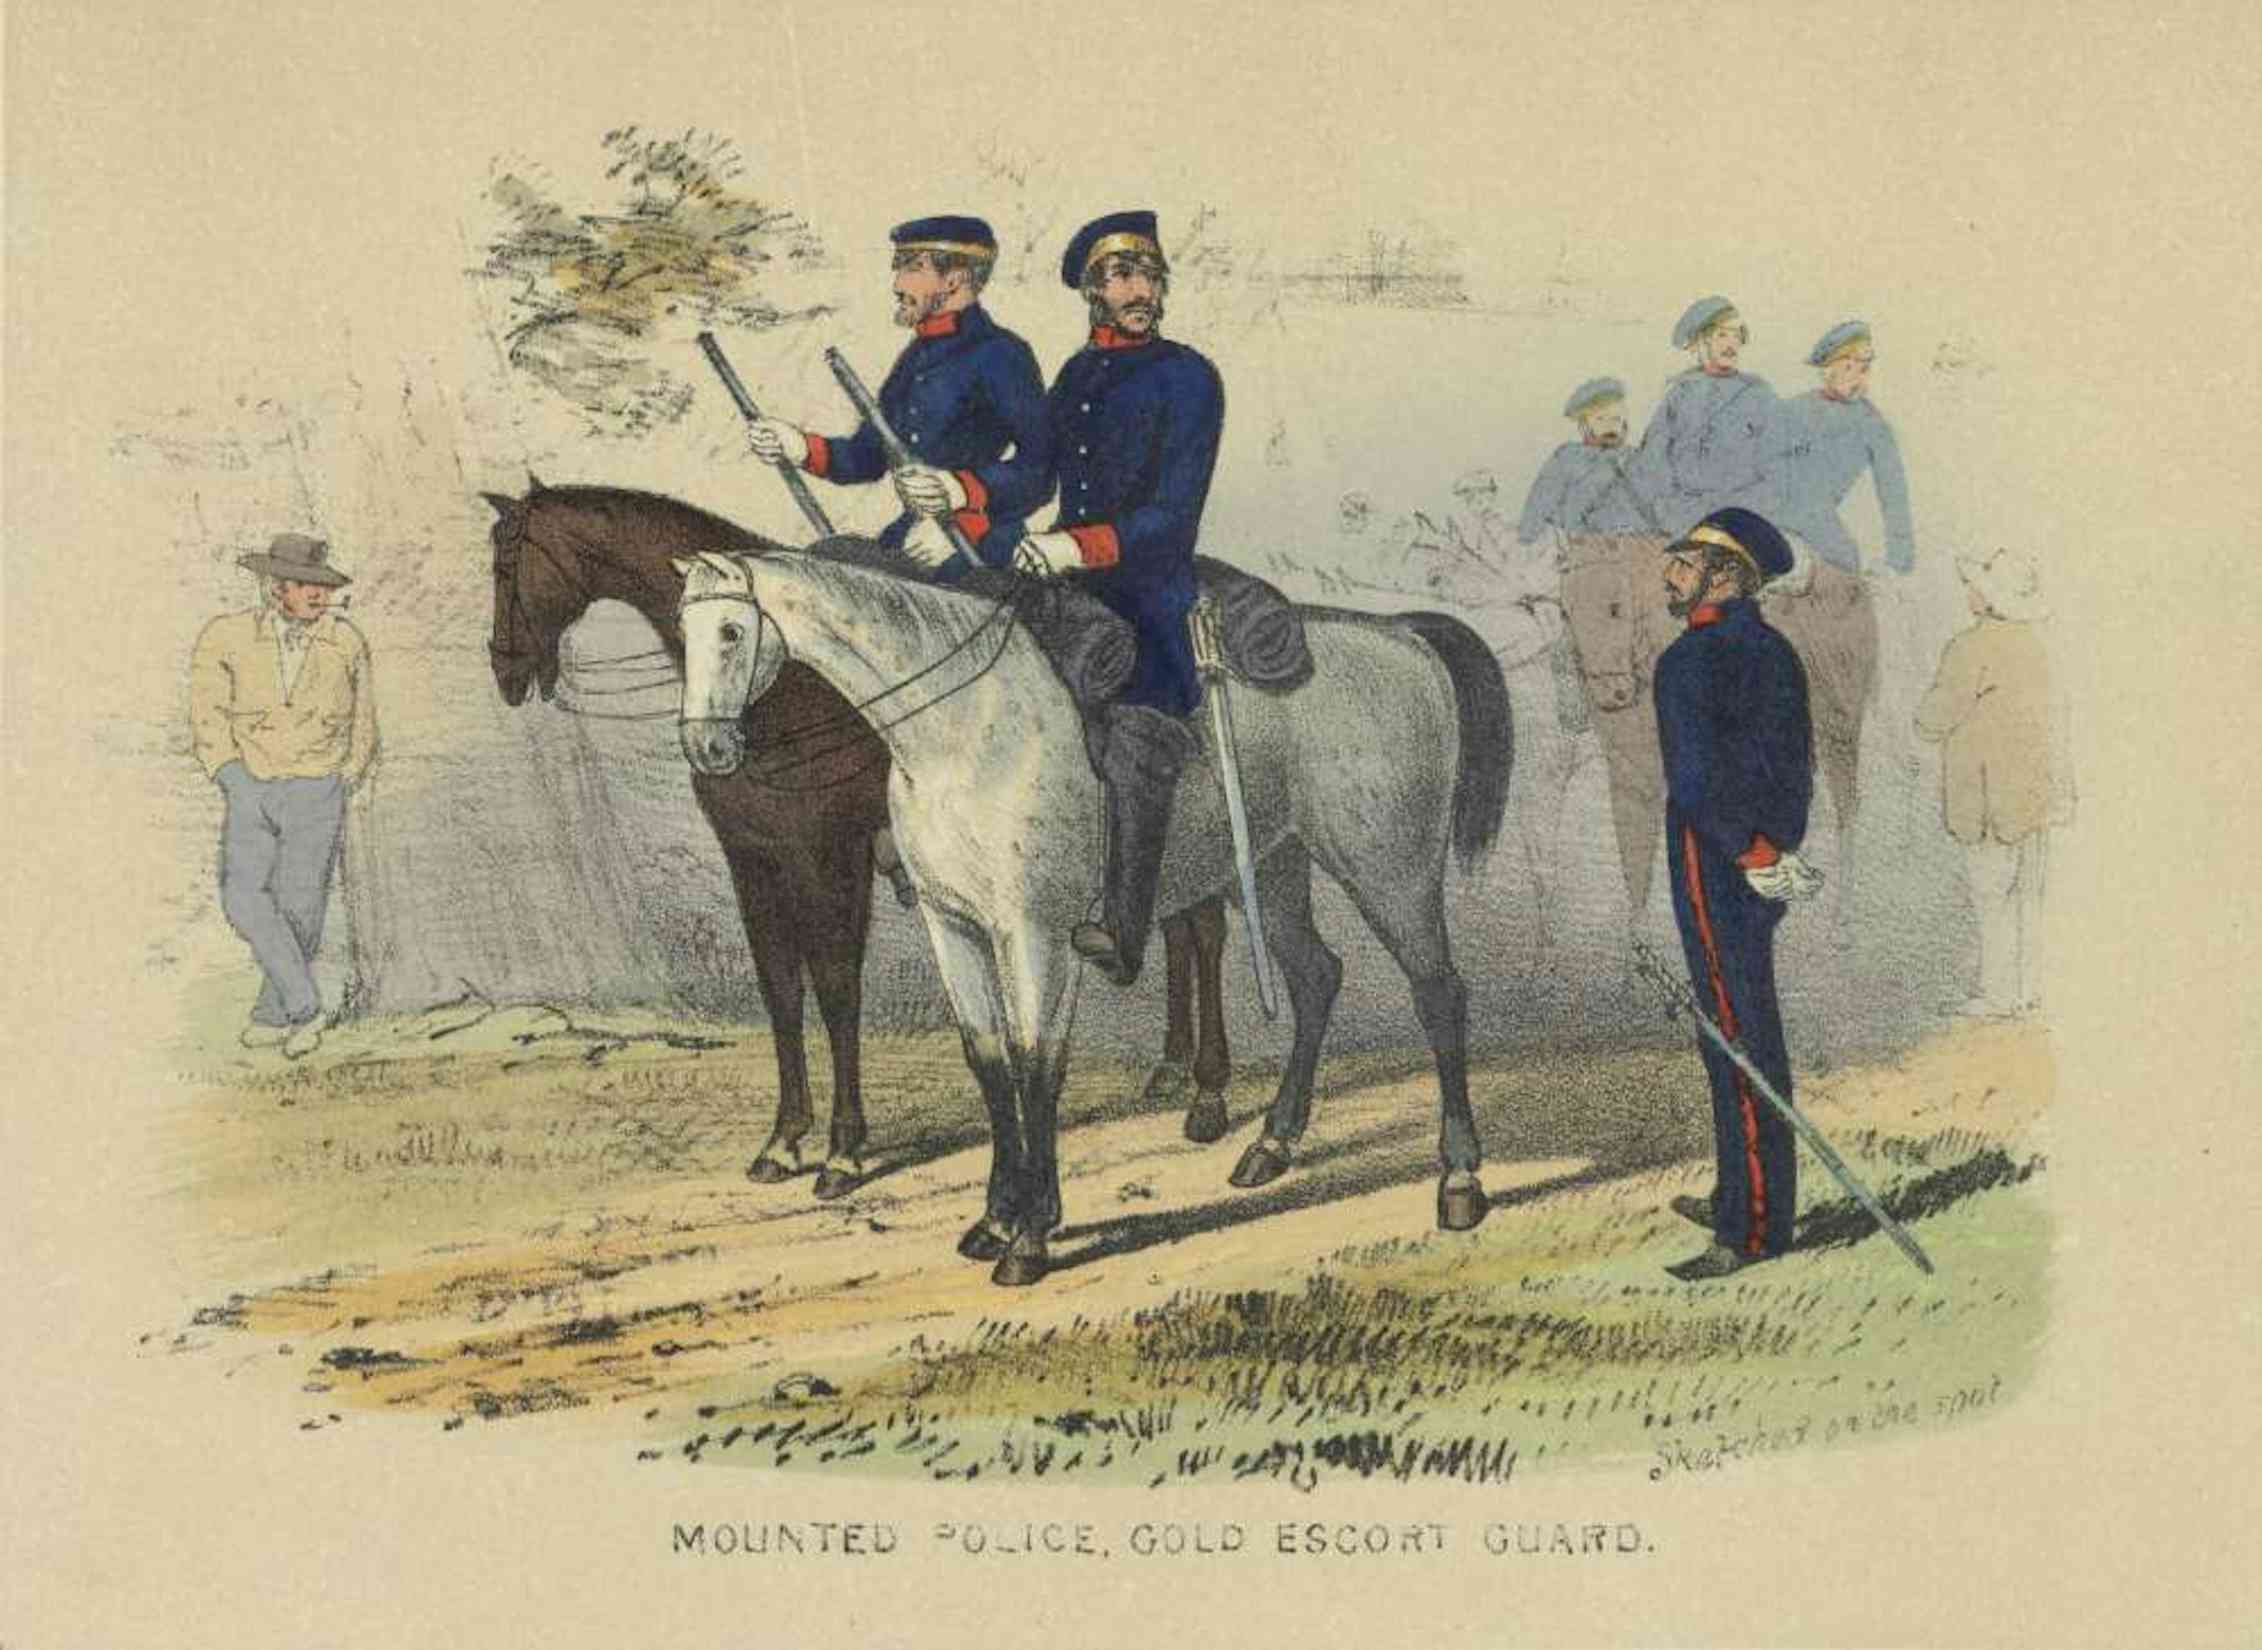 Mounted police, gold escort guard/ sketched on the spot by S.T. Gill.